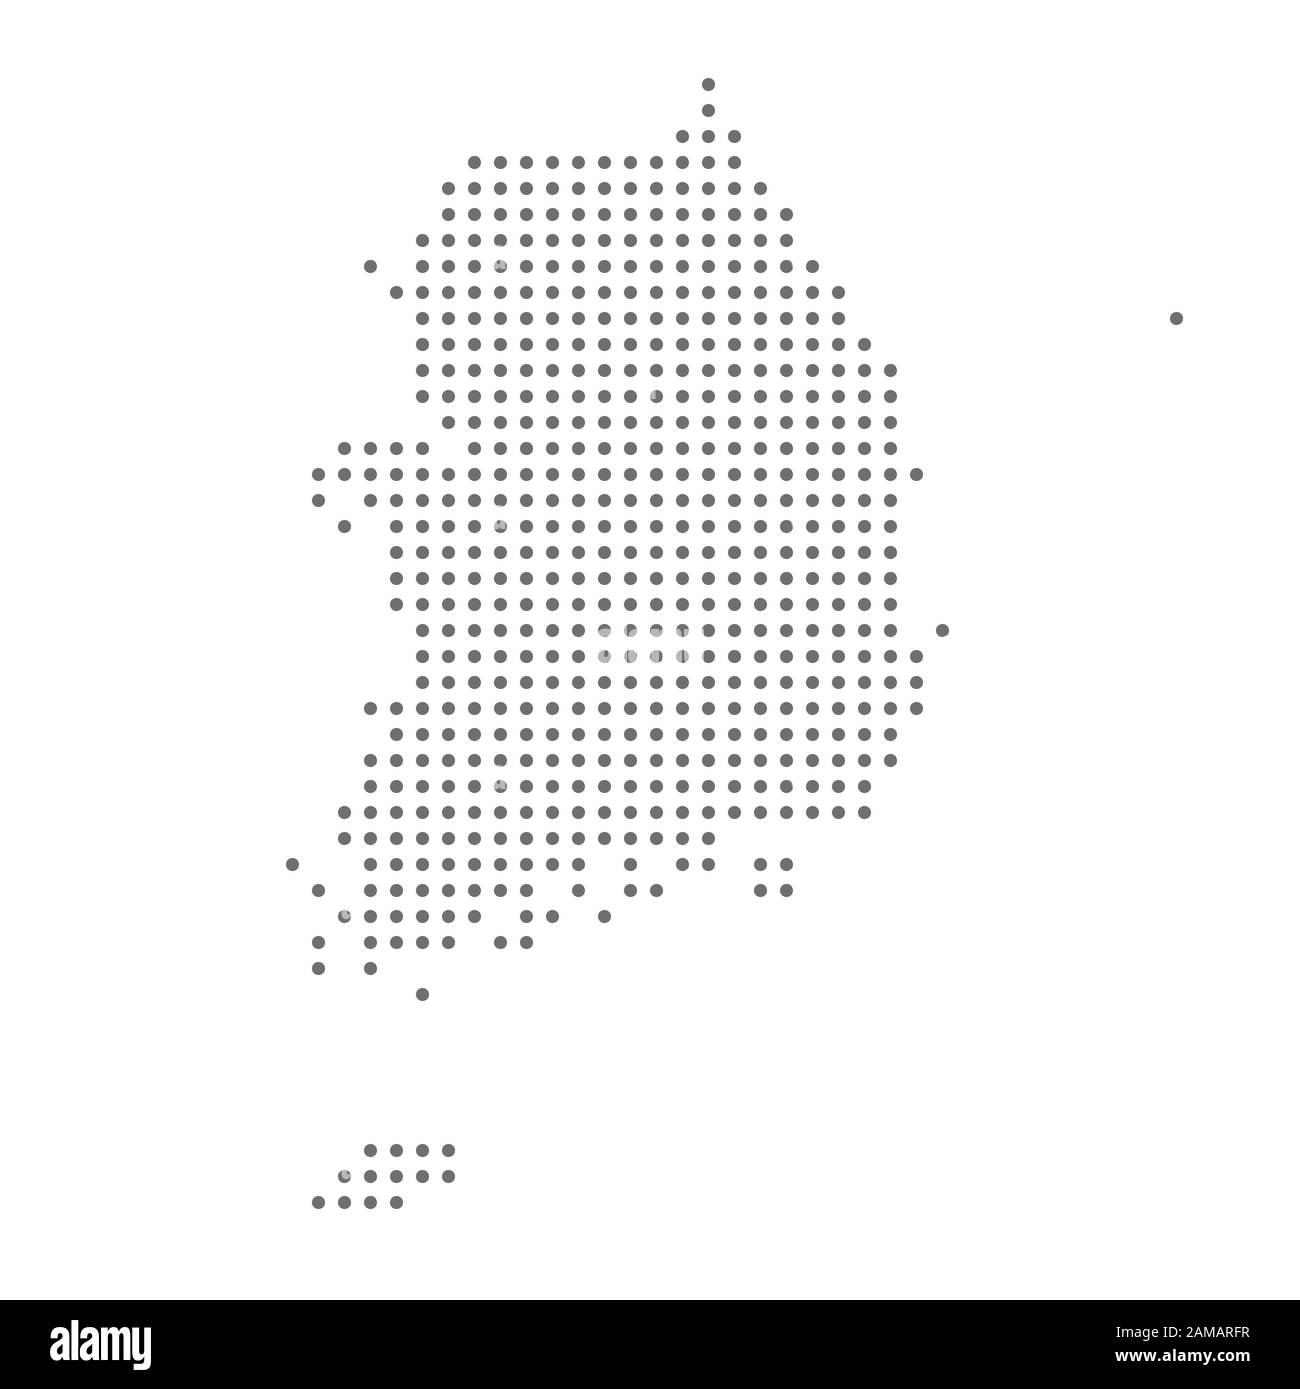 South korea map dotted grey point on white background Vector